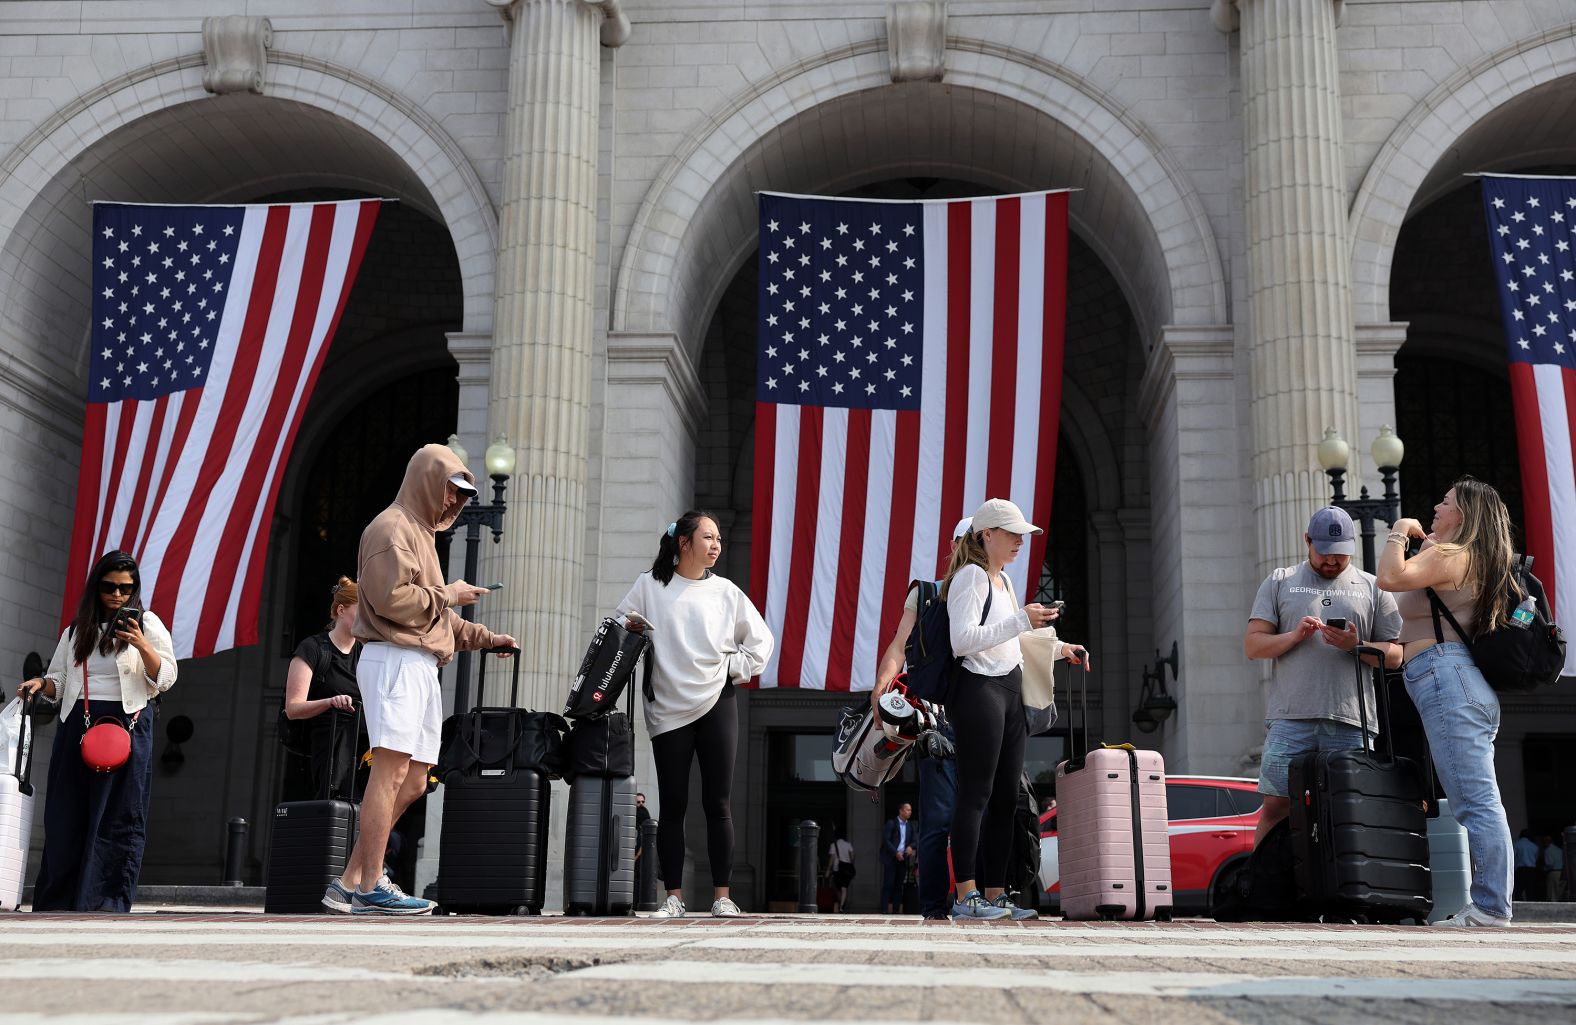 Travelers arrive at Union Station in Washington, DC, on Friday.